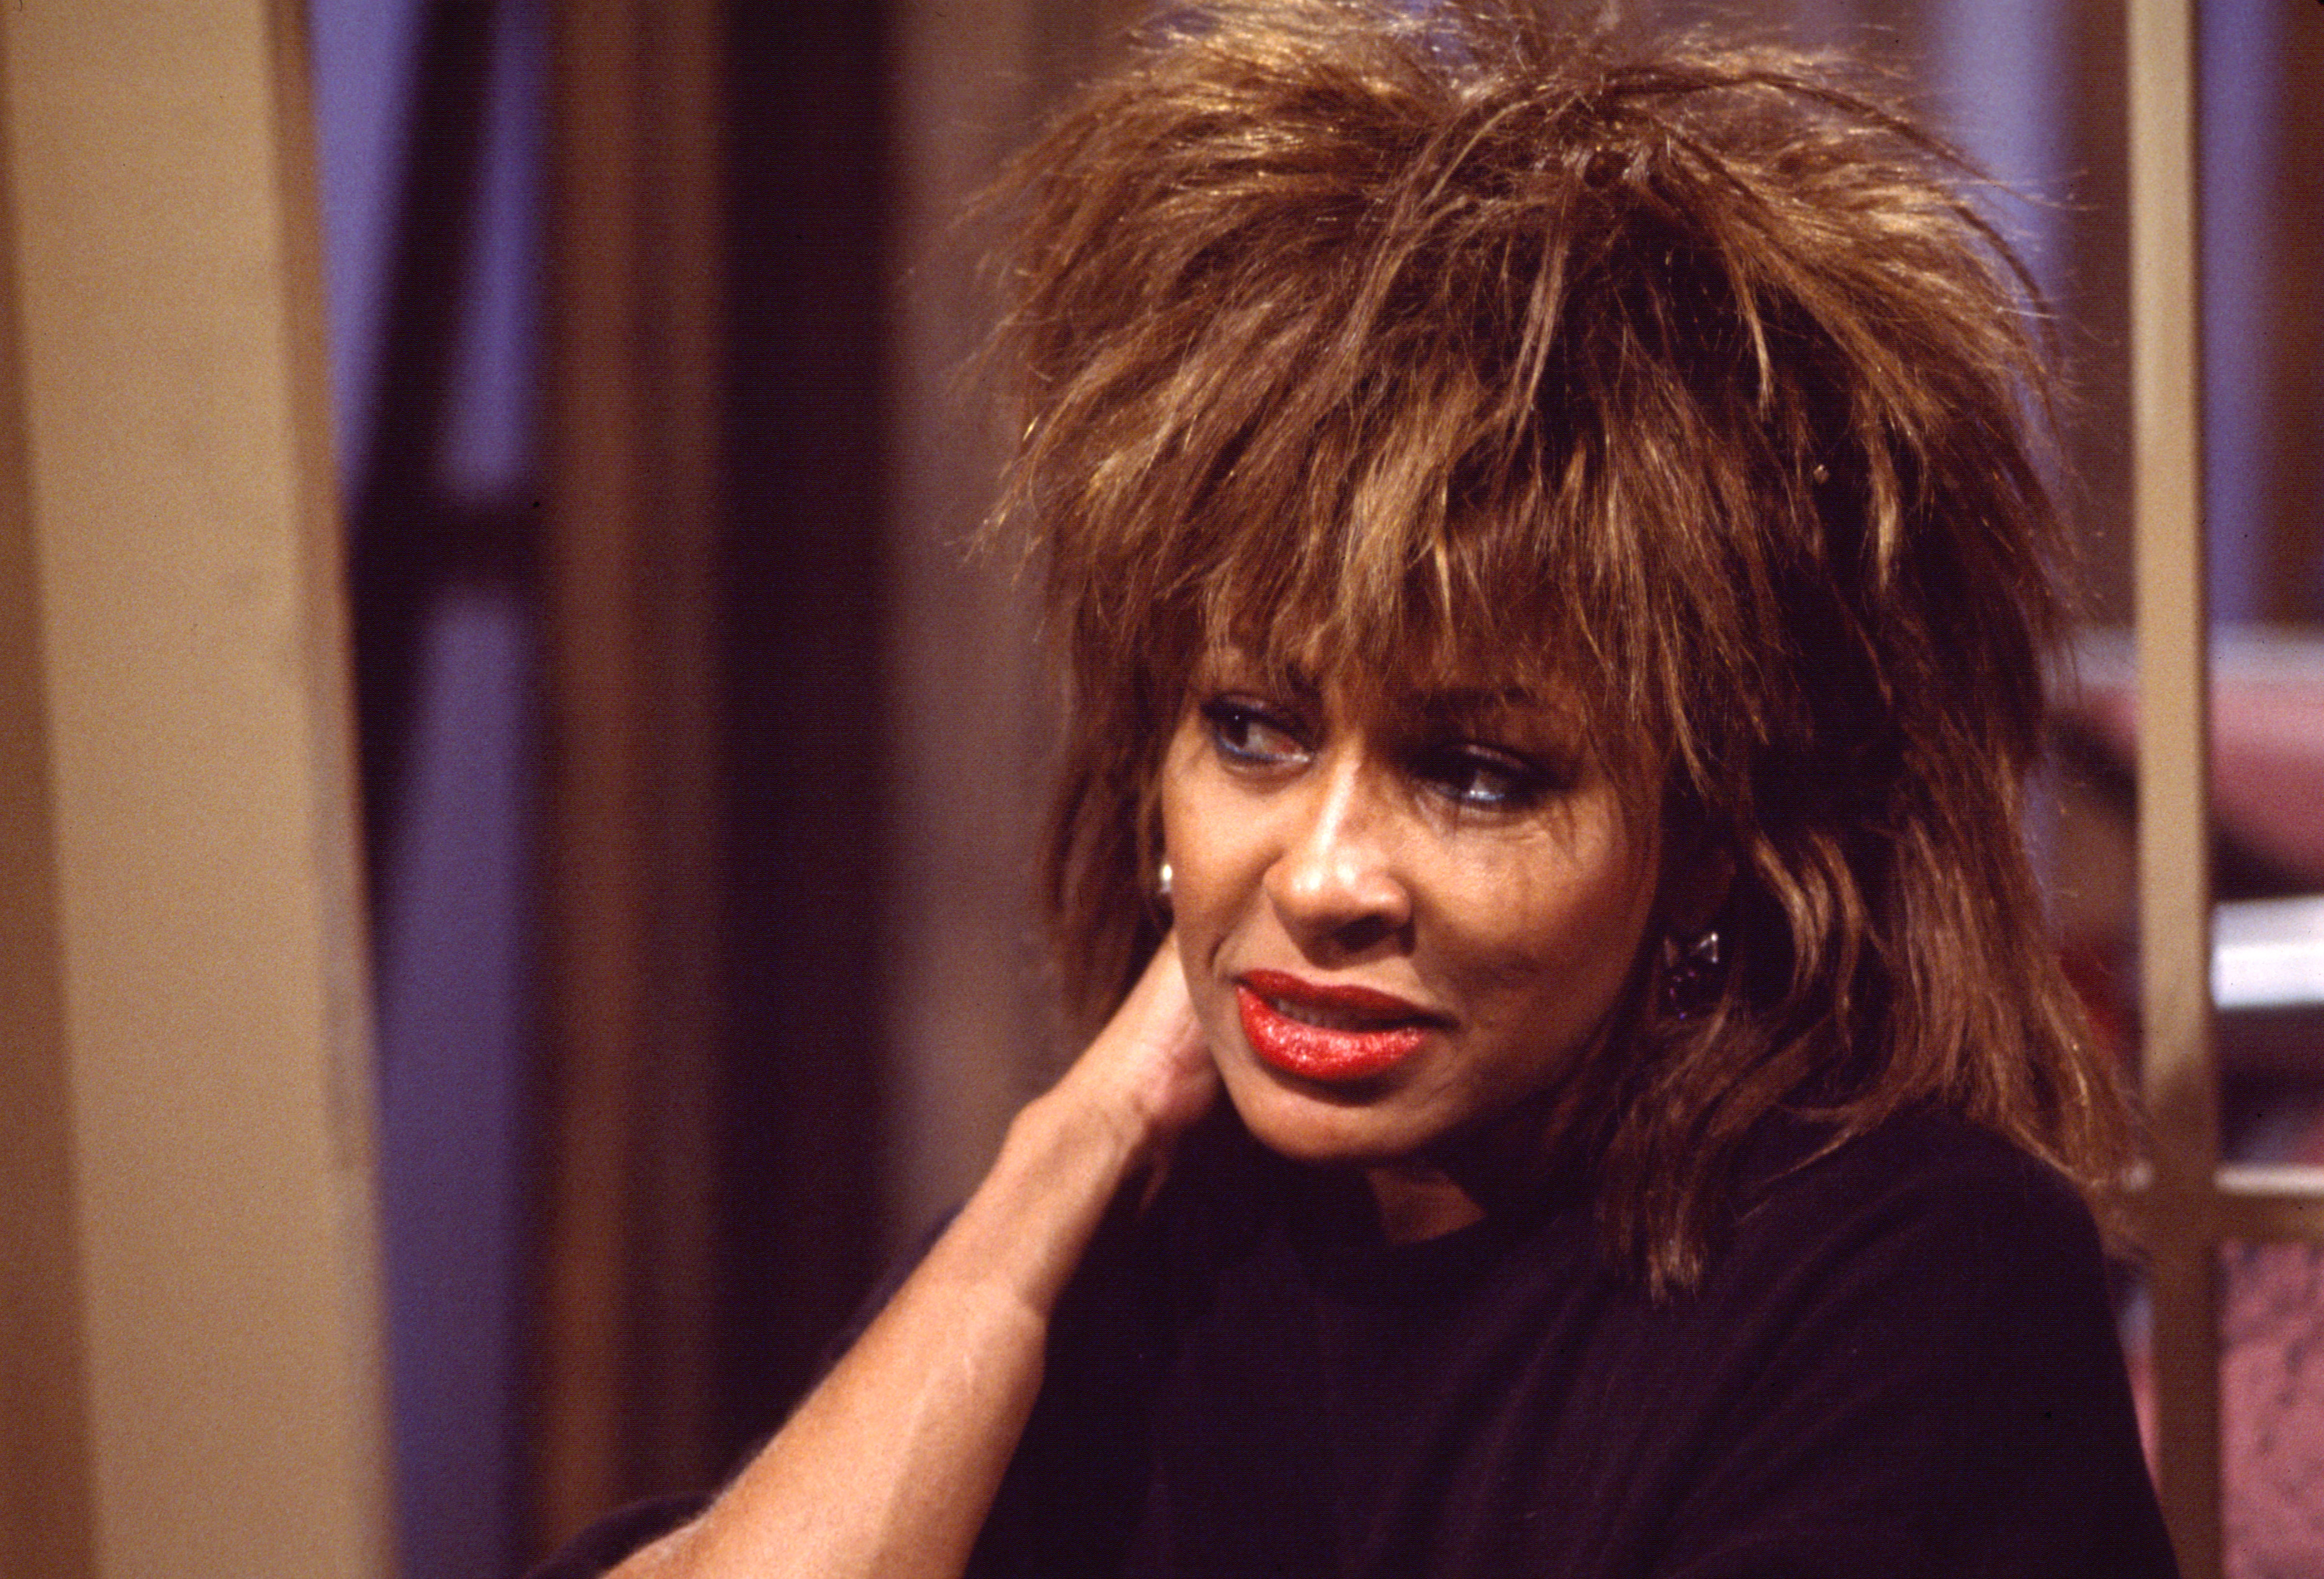 Tina Turner in New York on August 22, 1984 | Source: Getty Images